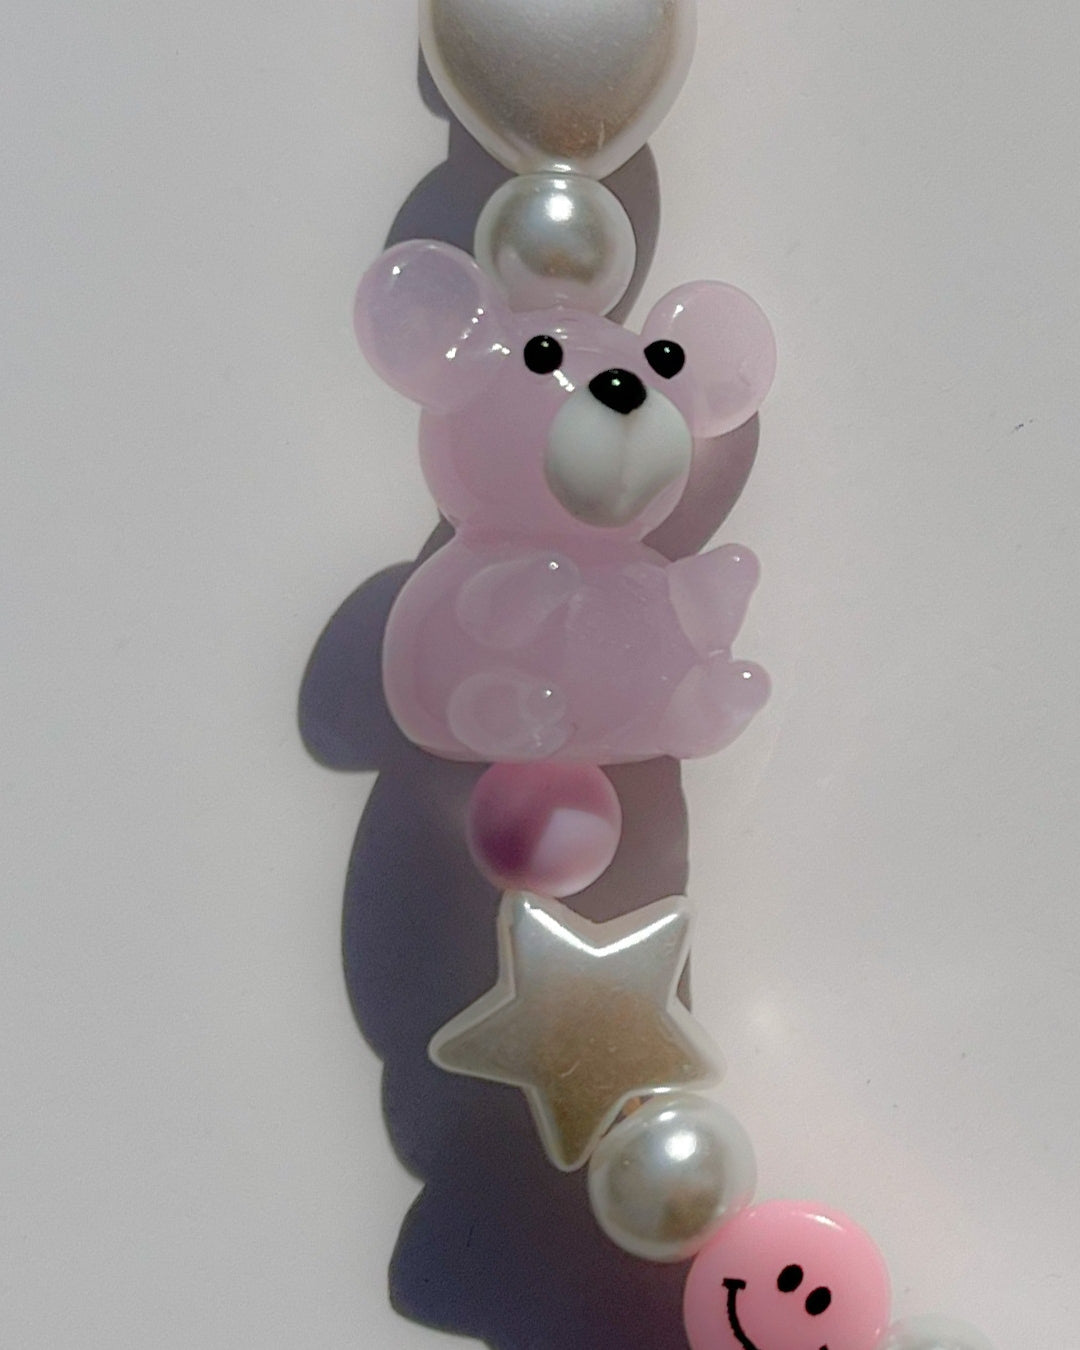 A close up studio shot of Buttercup Studio's Pink Teddy Princess Phone Strap. Made with pearls, white star and heart beads, a pink butterfly bead, a pink dice bead, a pink smiley face bead and a lampwork glass pink teddy bead.